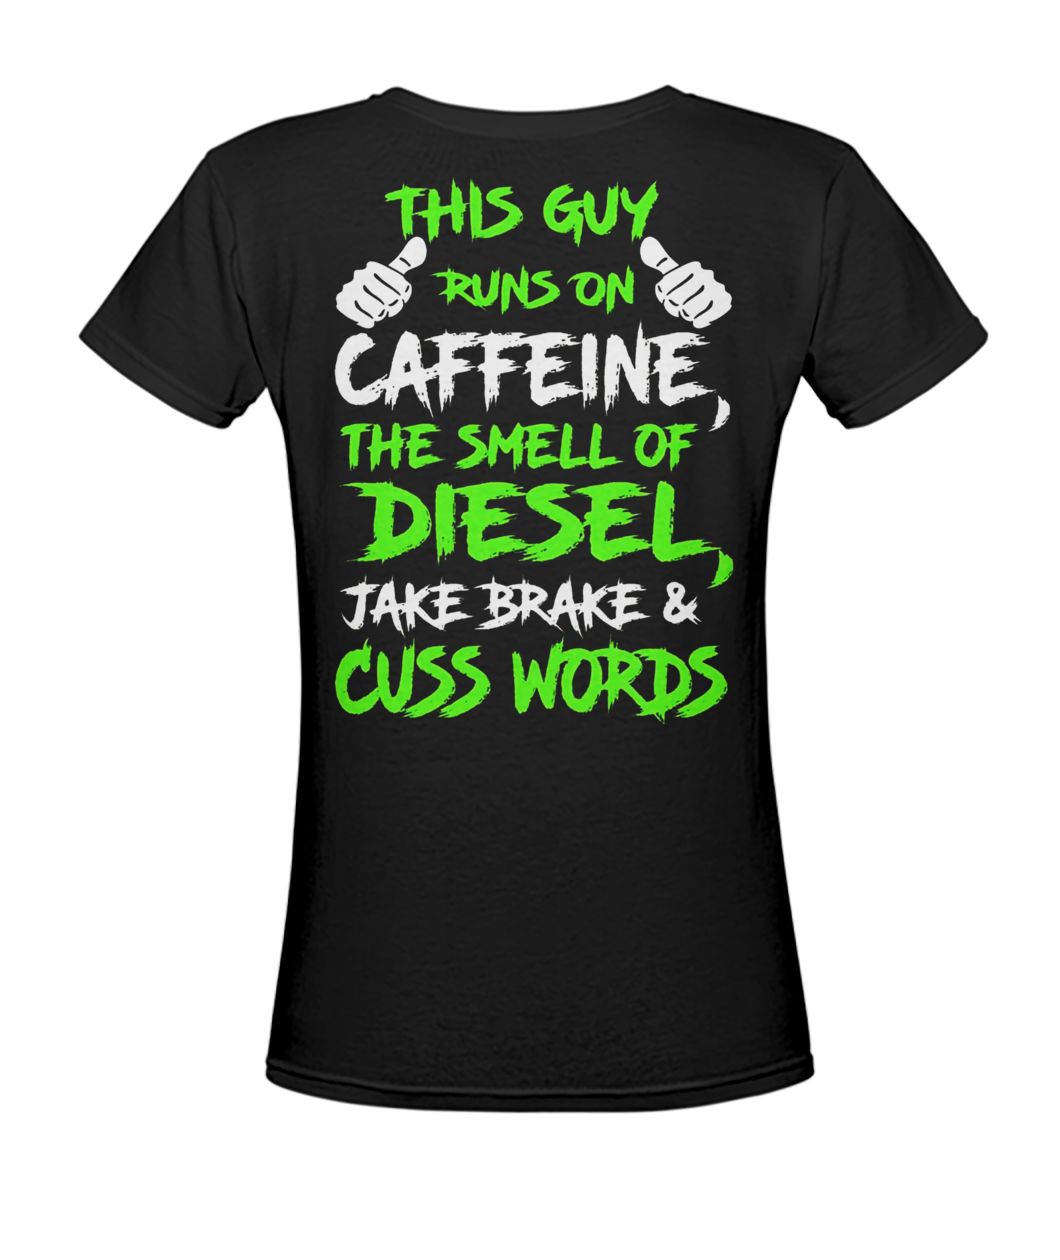 This guy runs on caffeine the smell of diesel jake brake and cuss words women's v-neck